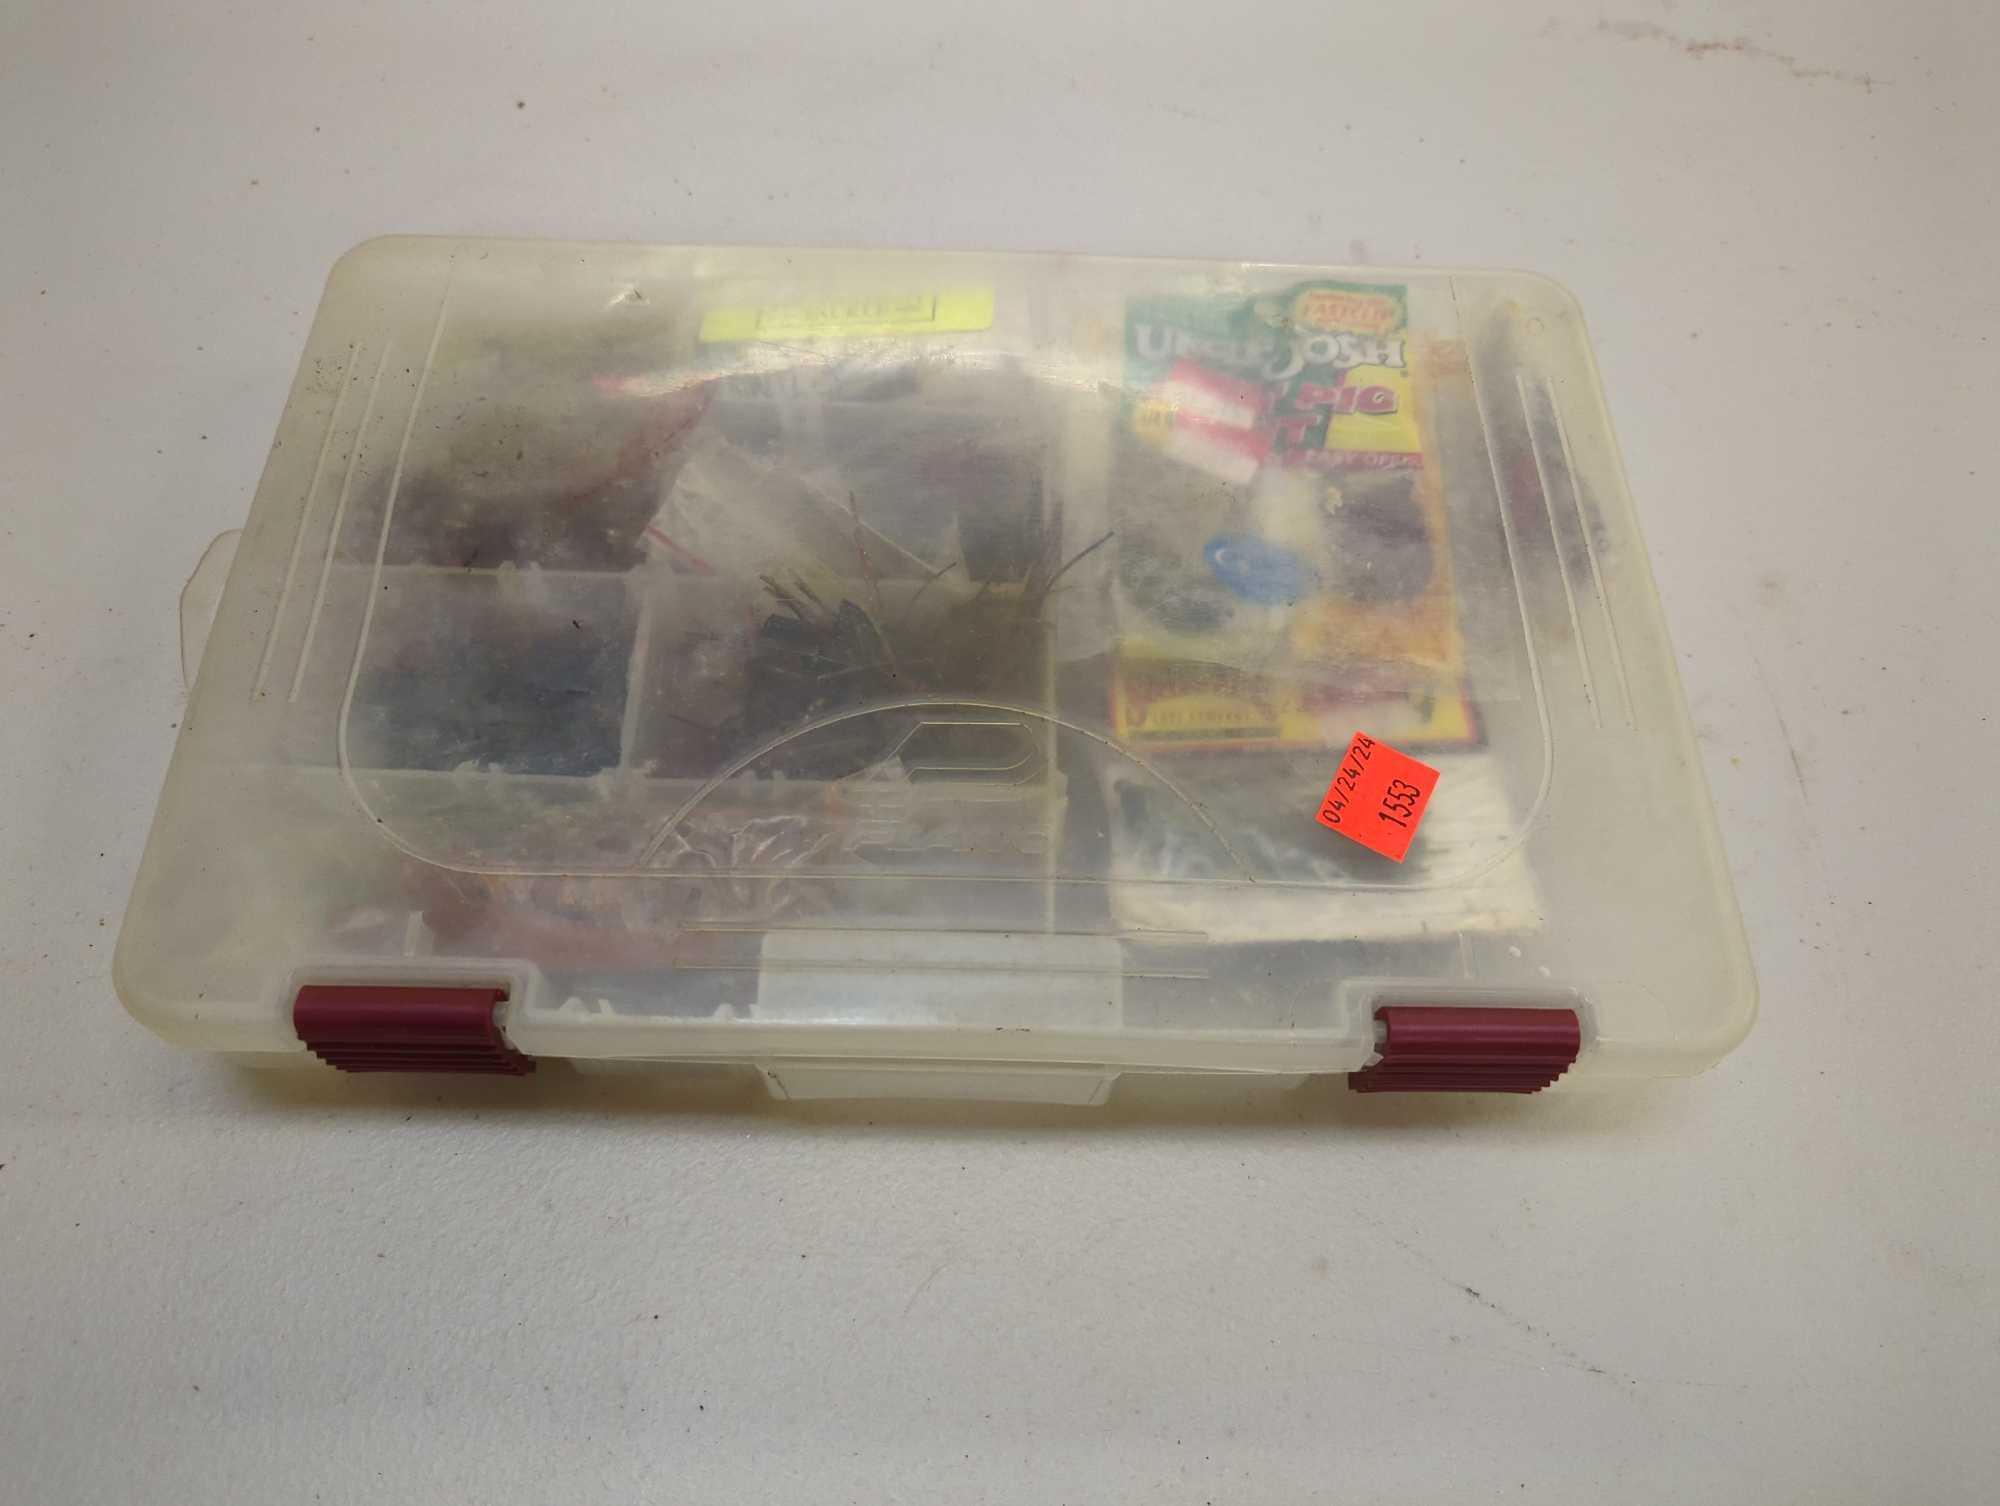 Tackle Box and contents including various fishing lures. Comes as is shown in photos. Appears to be